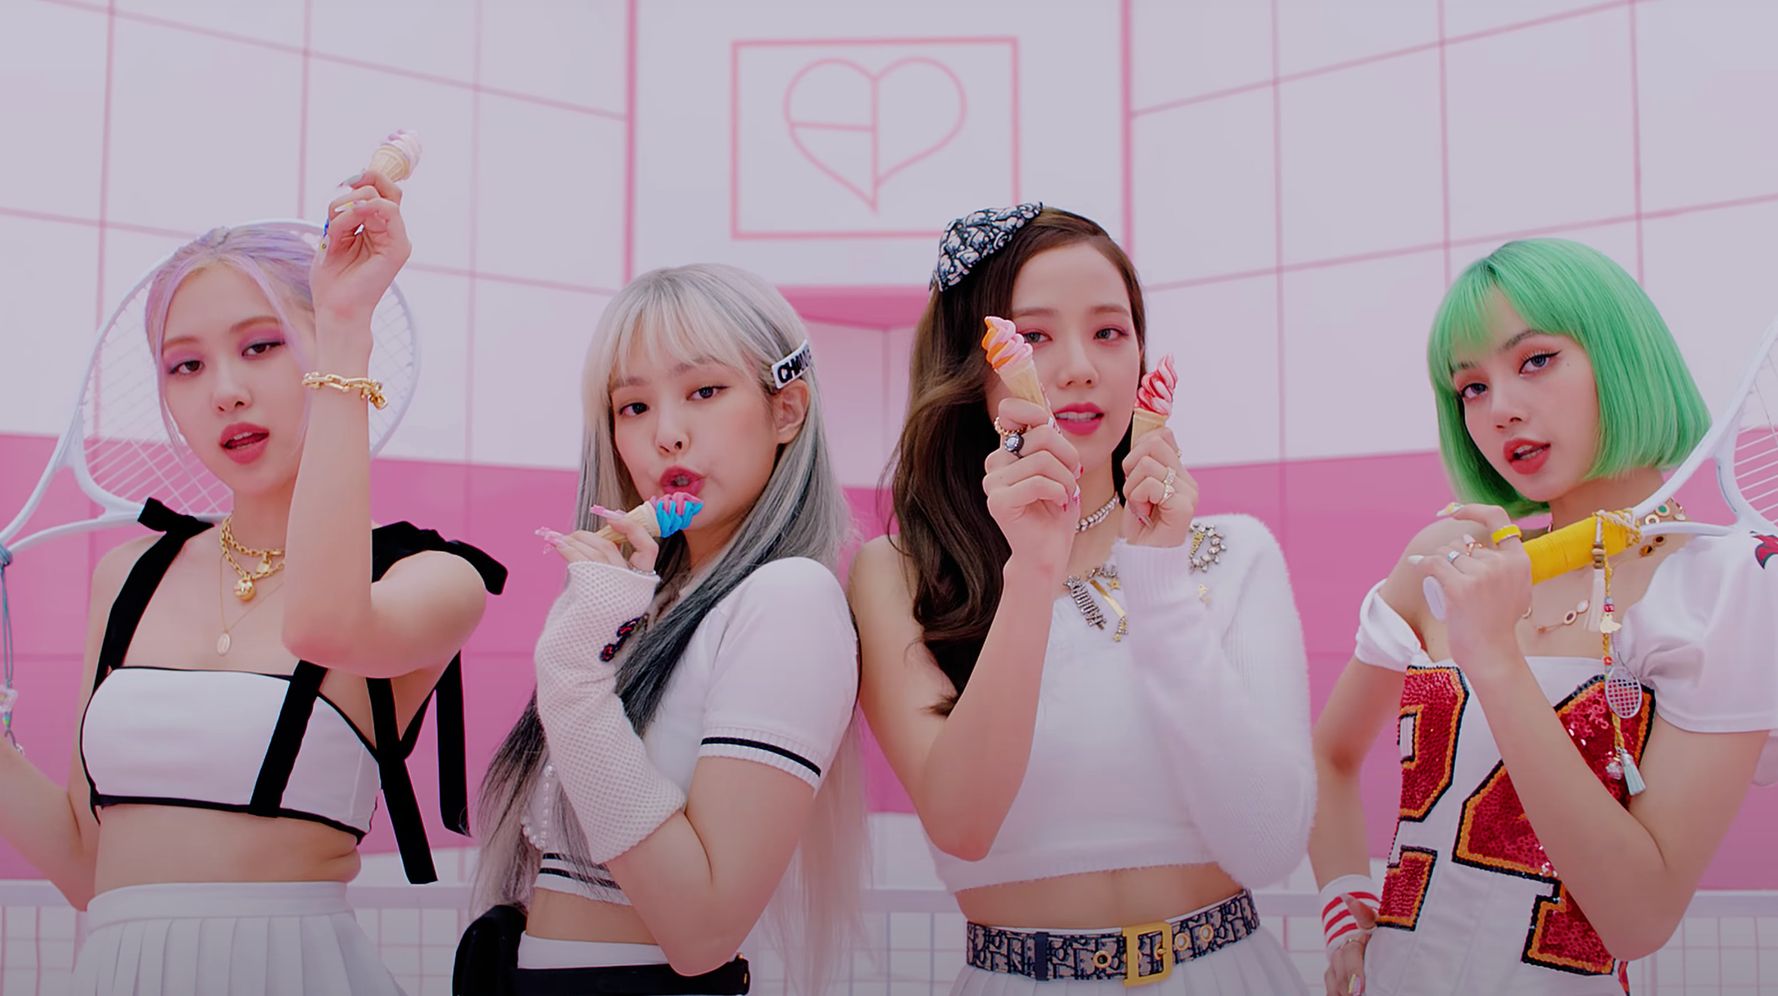 BLACKPINK Releases New Song 'The Girls' & Music Video In 'The Game